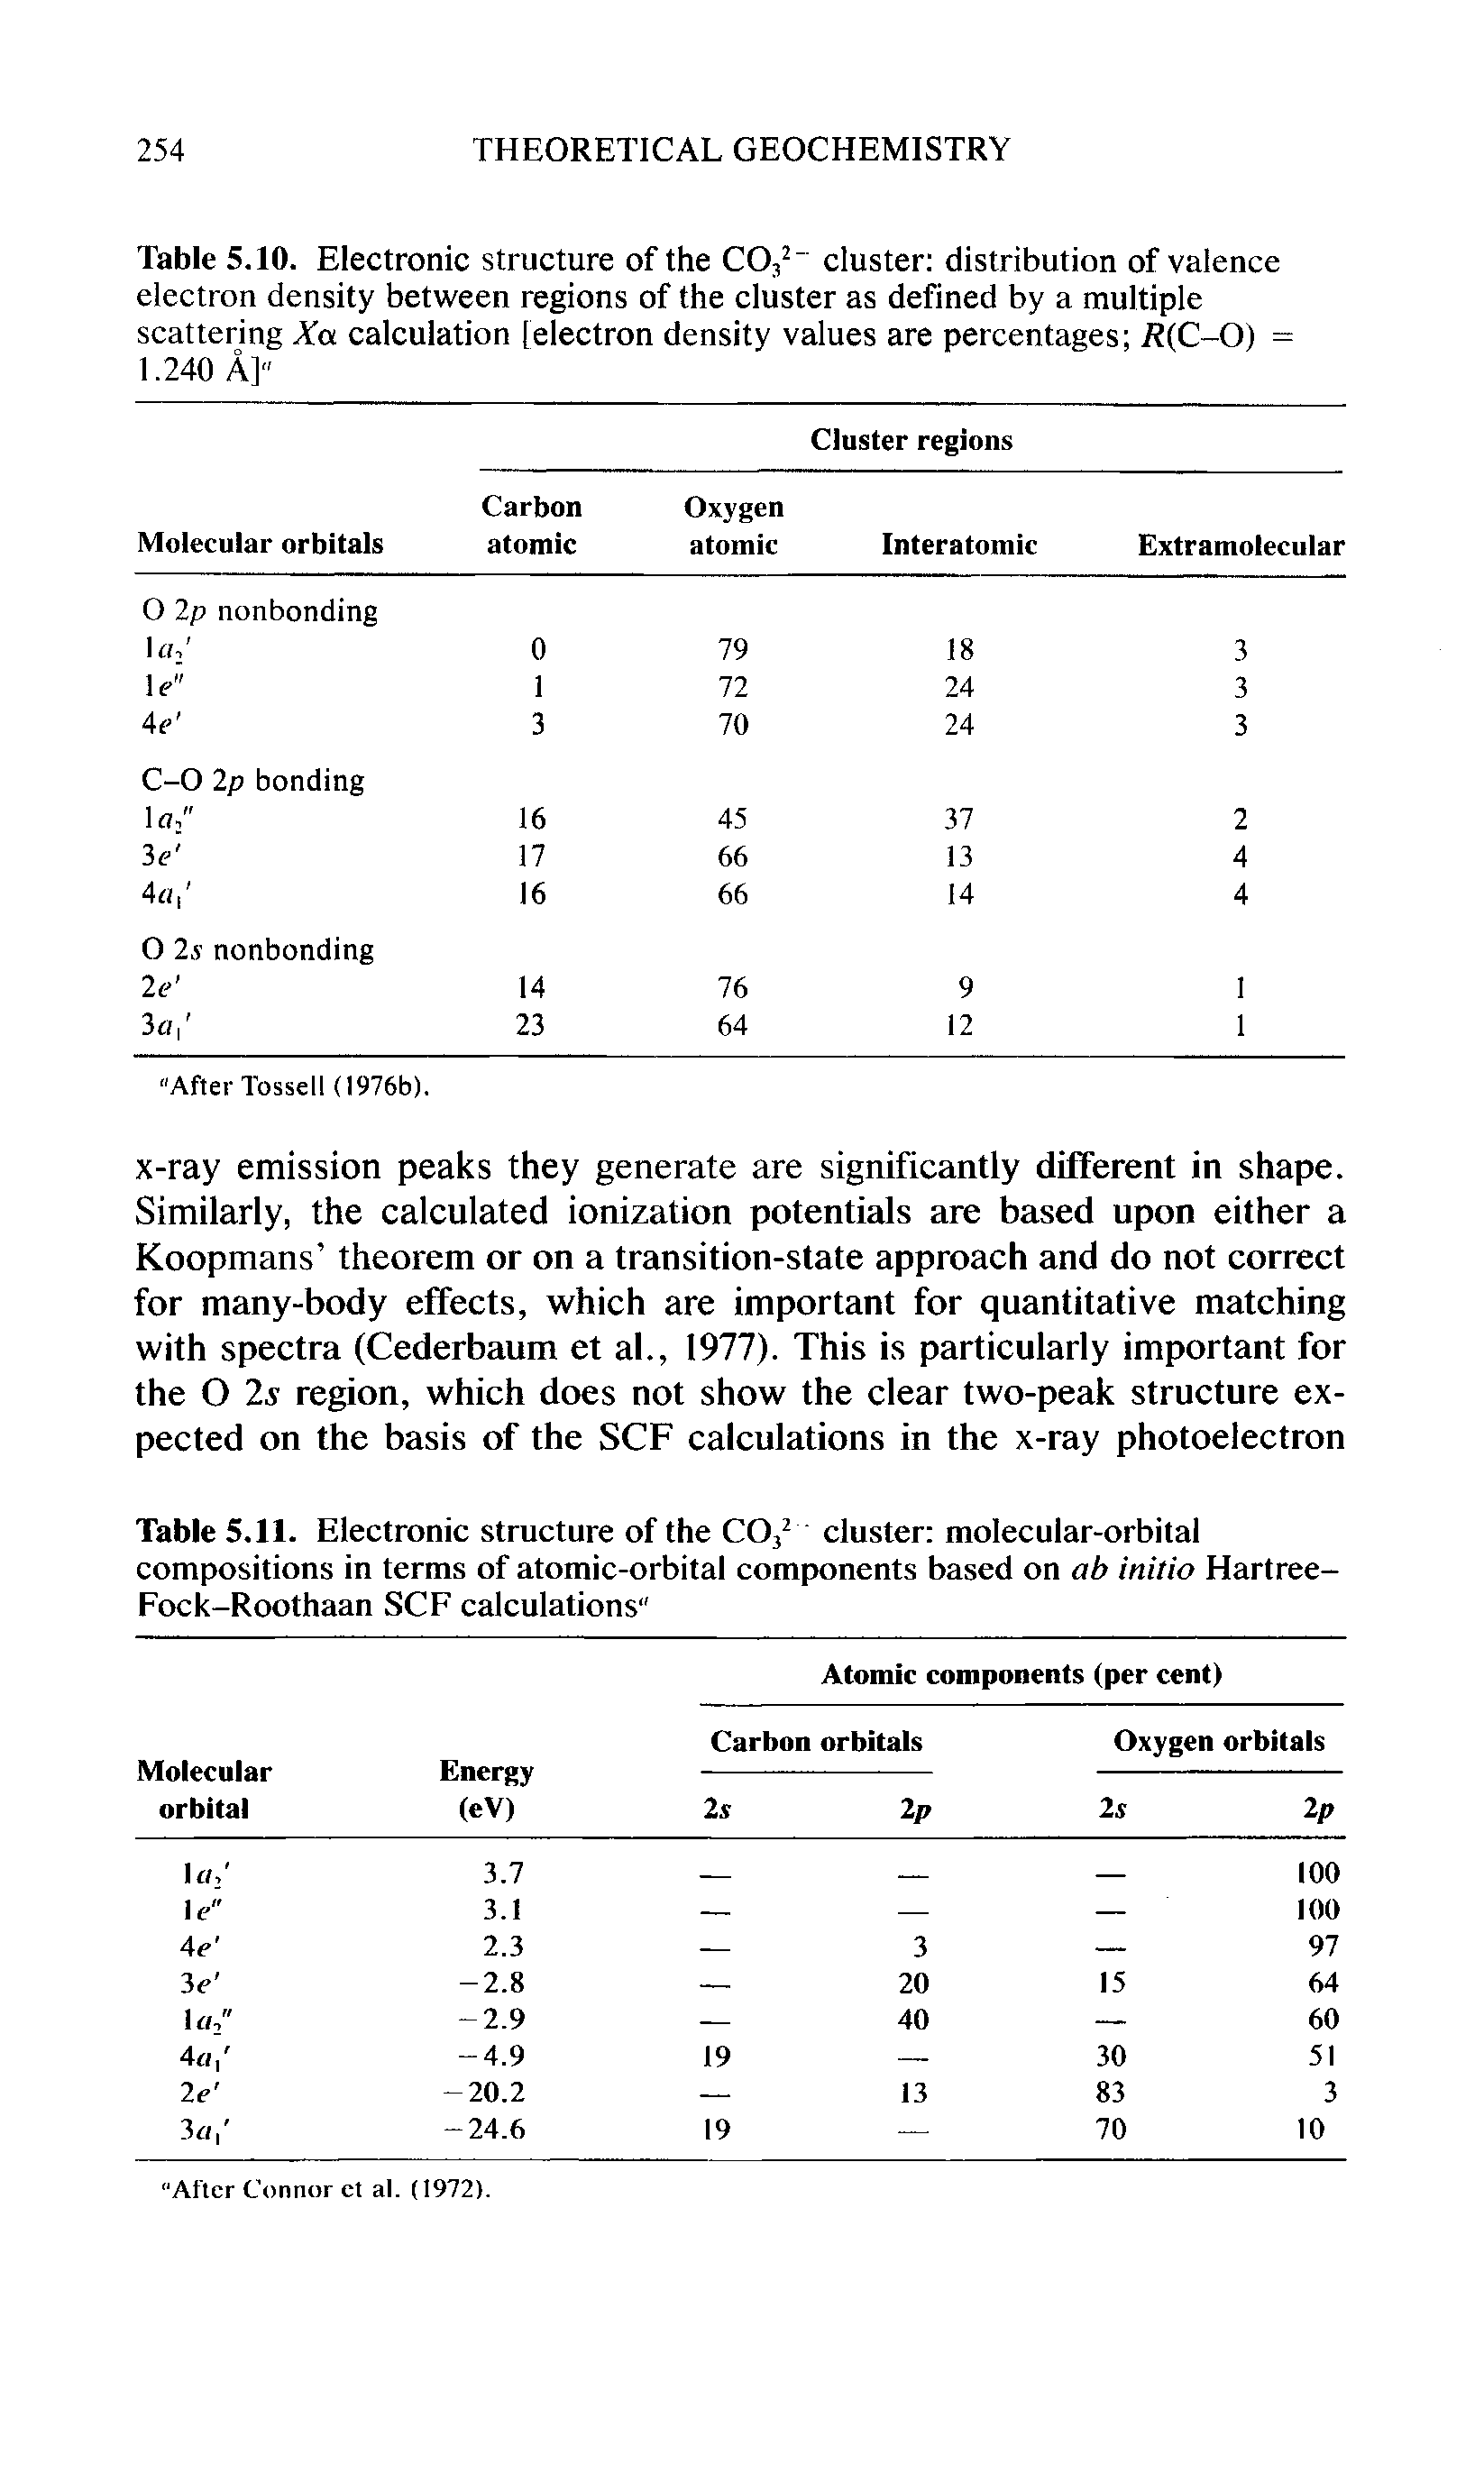 Table 5.10. Electronic structure of the CO, cluster distribution of valence electron density between regions of the cluster as defined by a multiple scattering Xa calculation [electron density values are percentages i (C-0) = 1.240 A]"...